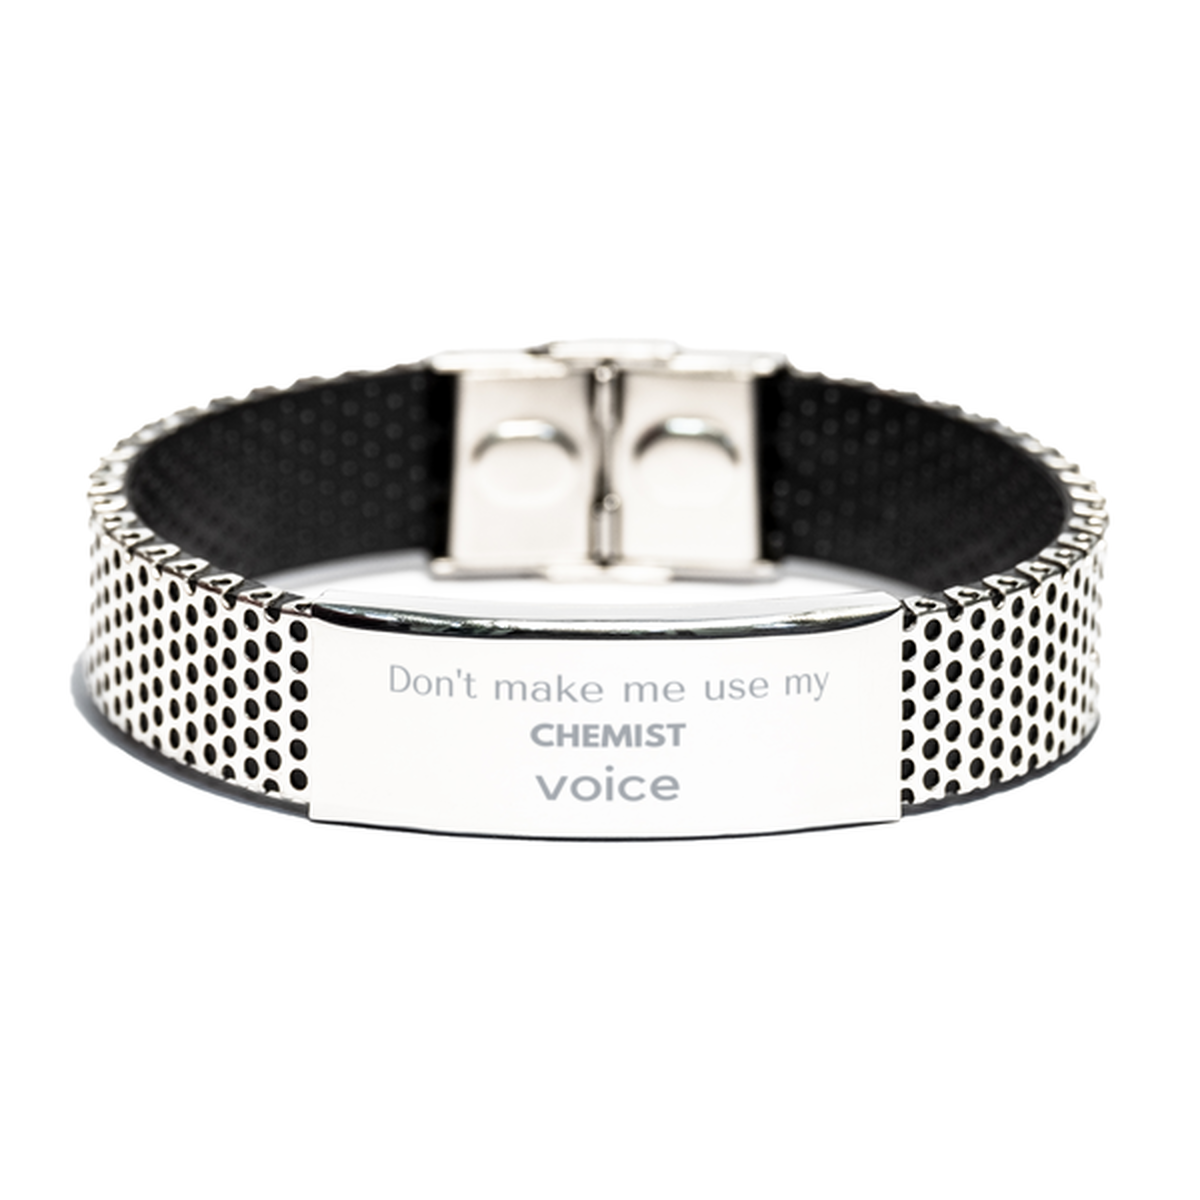 Don't make me use my Chemist voice, Sarcasm Chemist Gifts, Christmas Chemist Stainless Steel Bracelet Birthday Unique Gifts For Chemist Coworkers, Men, Women, Colleague, Friends